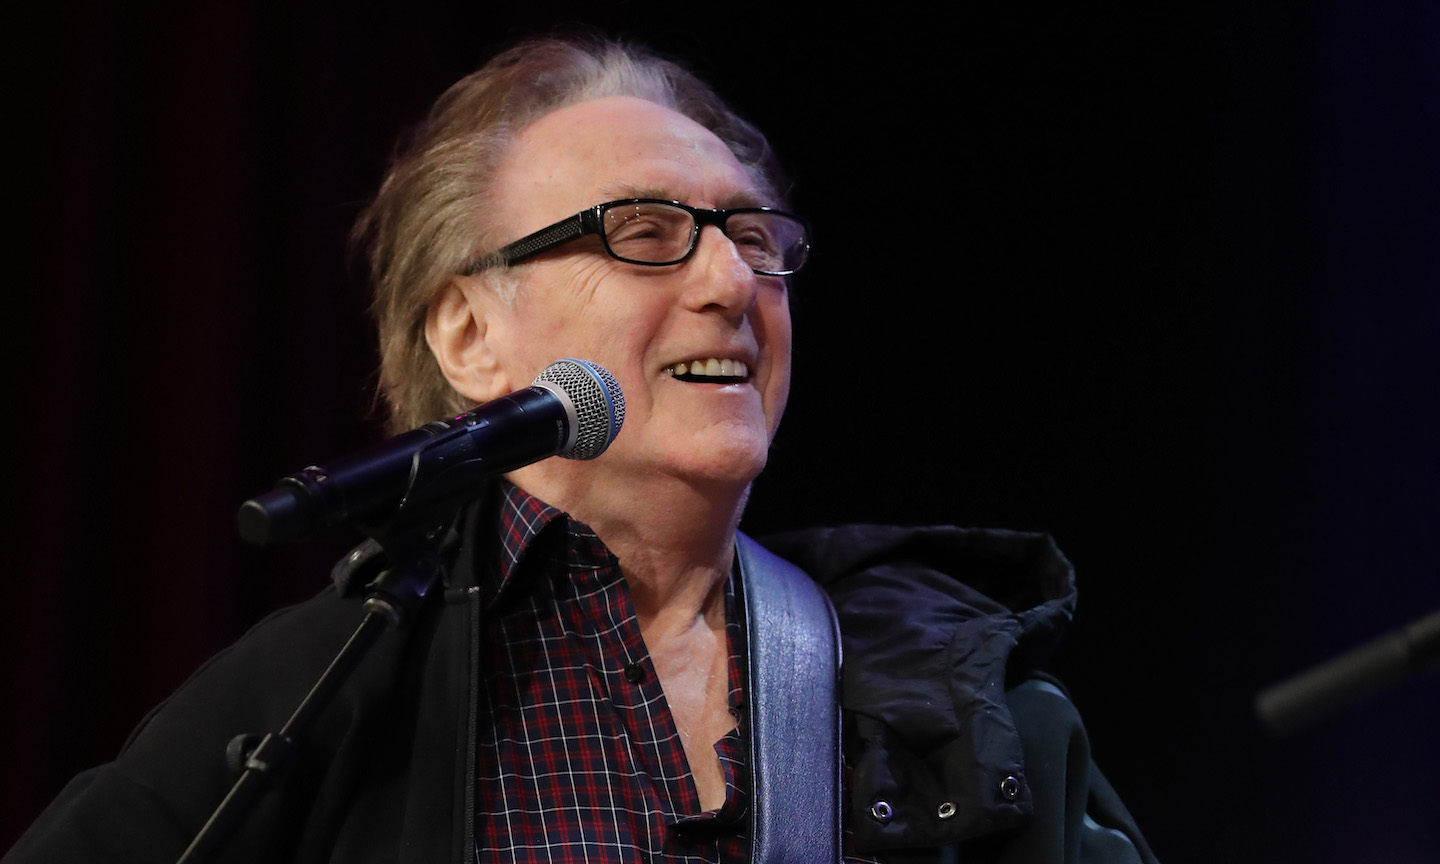 Denny Laine, Wings and Moody Blues musician, dies age 79 - BBC News